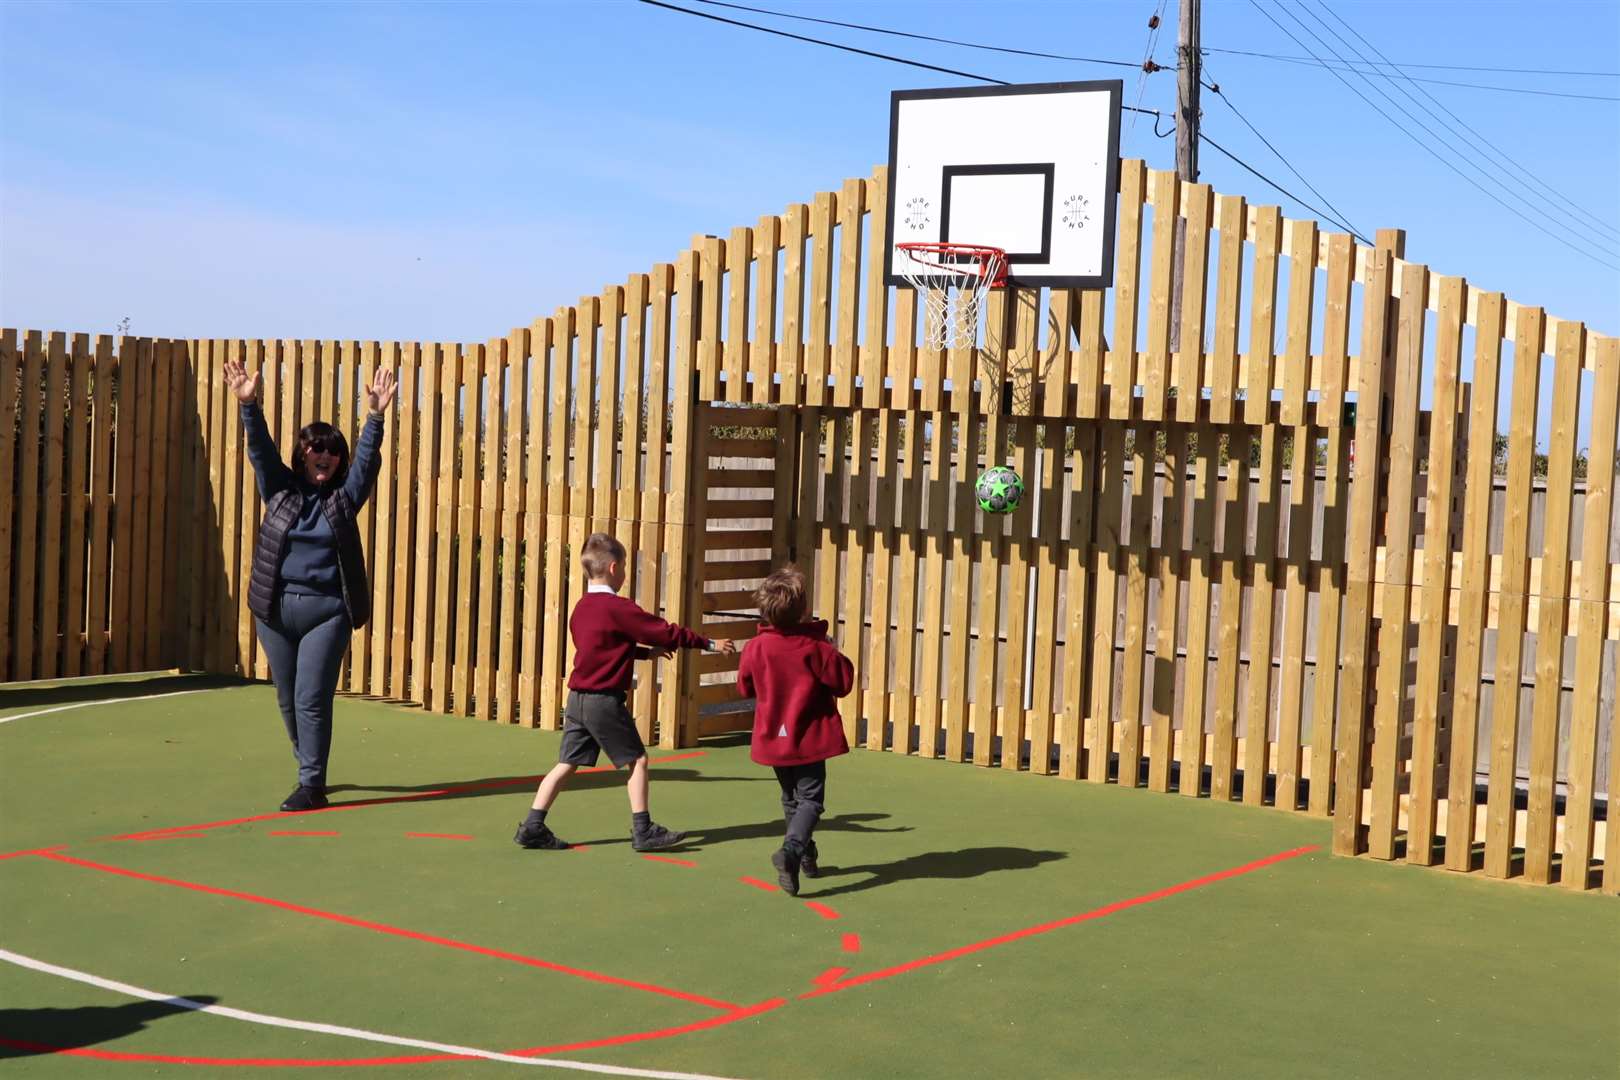 The new multi-use game area is already being used at Golden Leas holiday park, Minster, Sheppey. It replaces a skateboard park